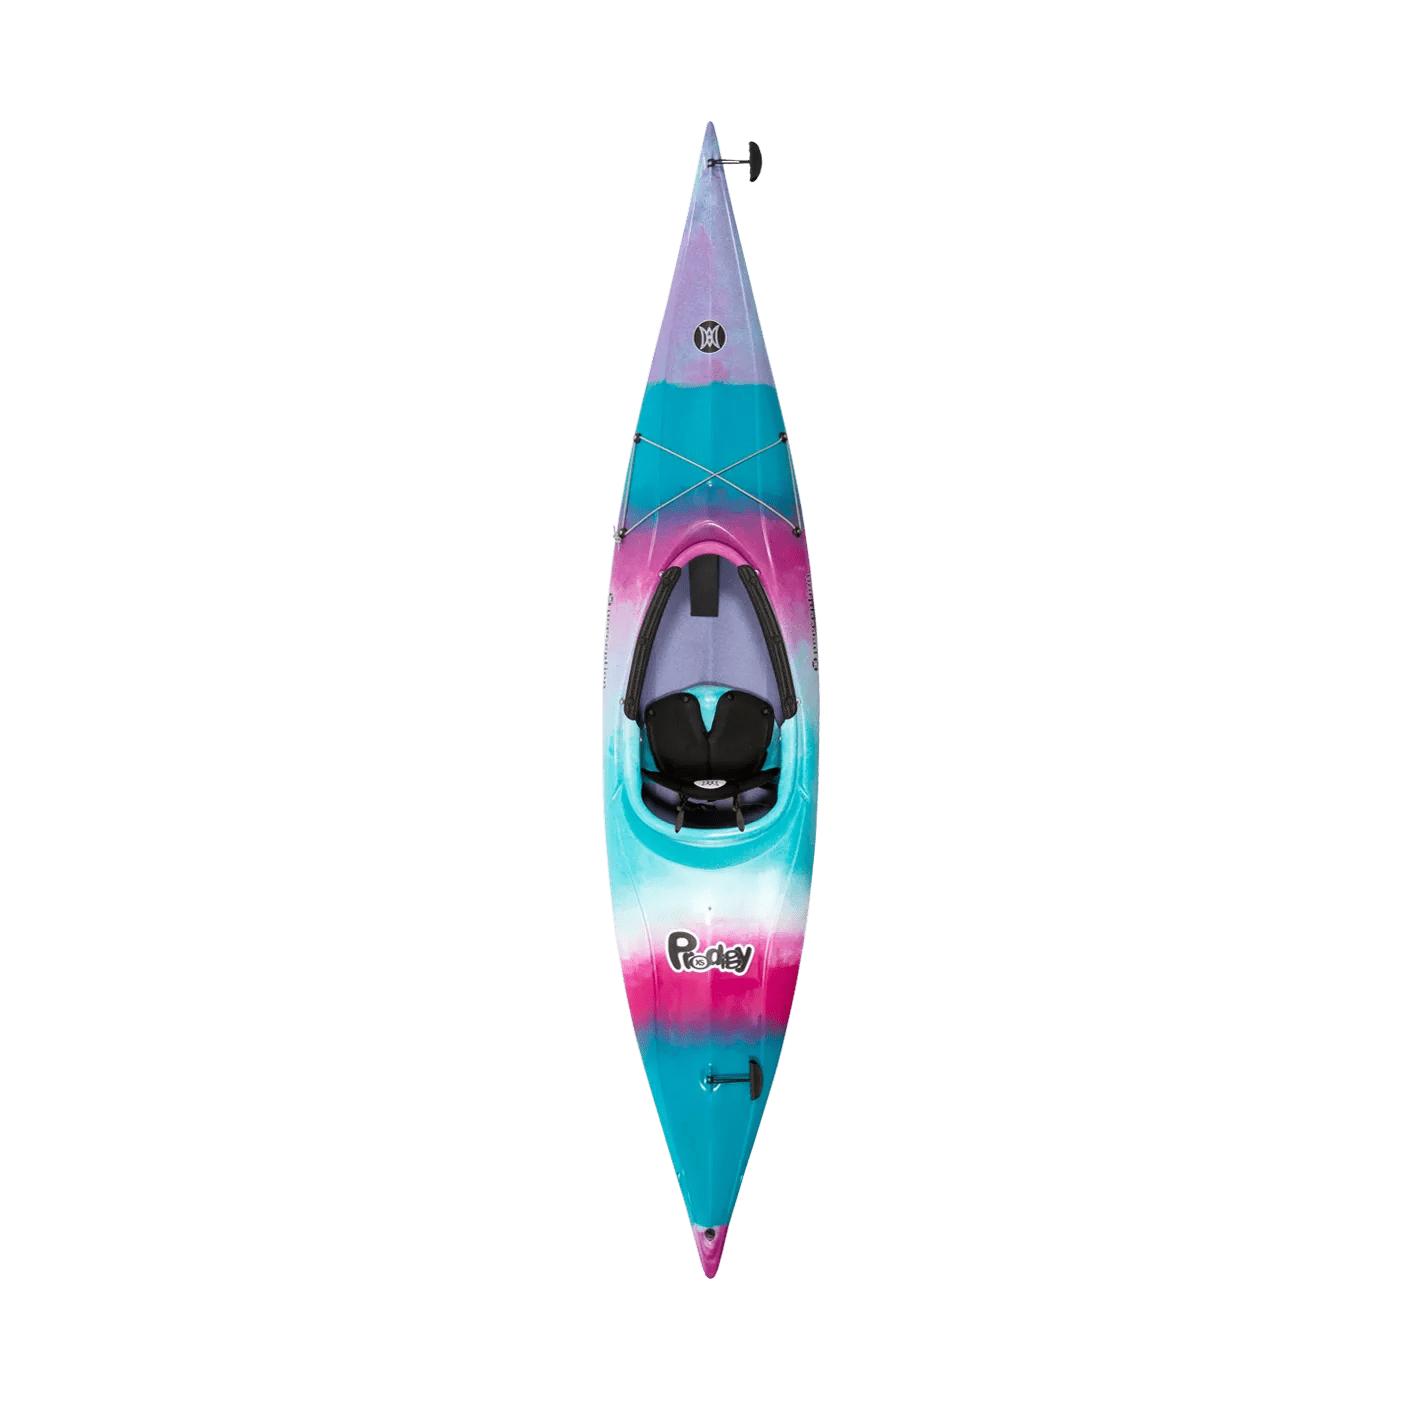 PERCEPTION - Prodigy XS Recreational Kayak - Discontinued color/model - Violet - 9330335173 - TOP 